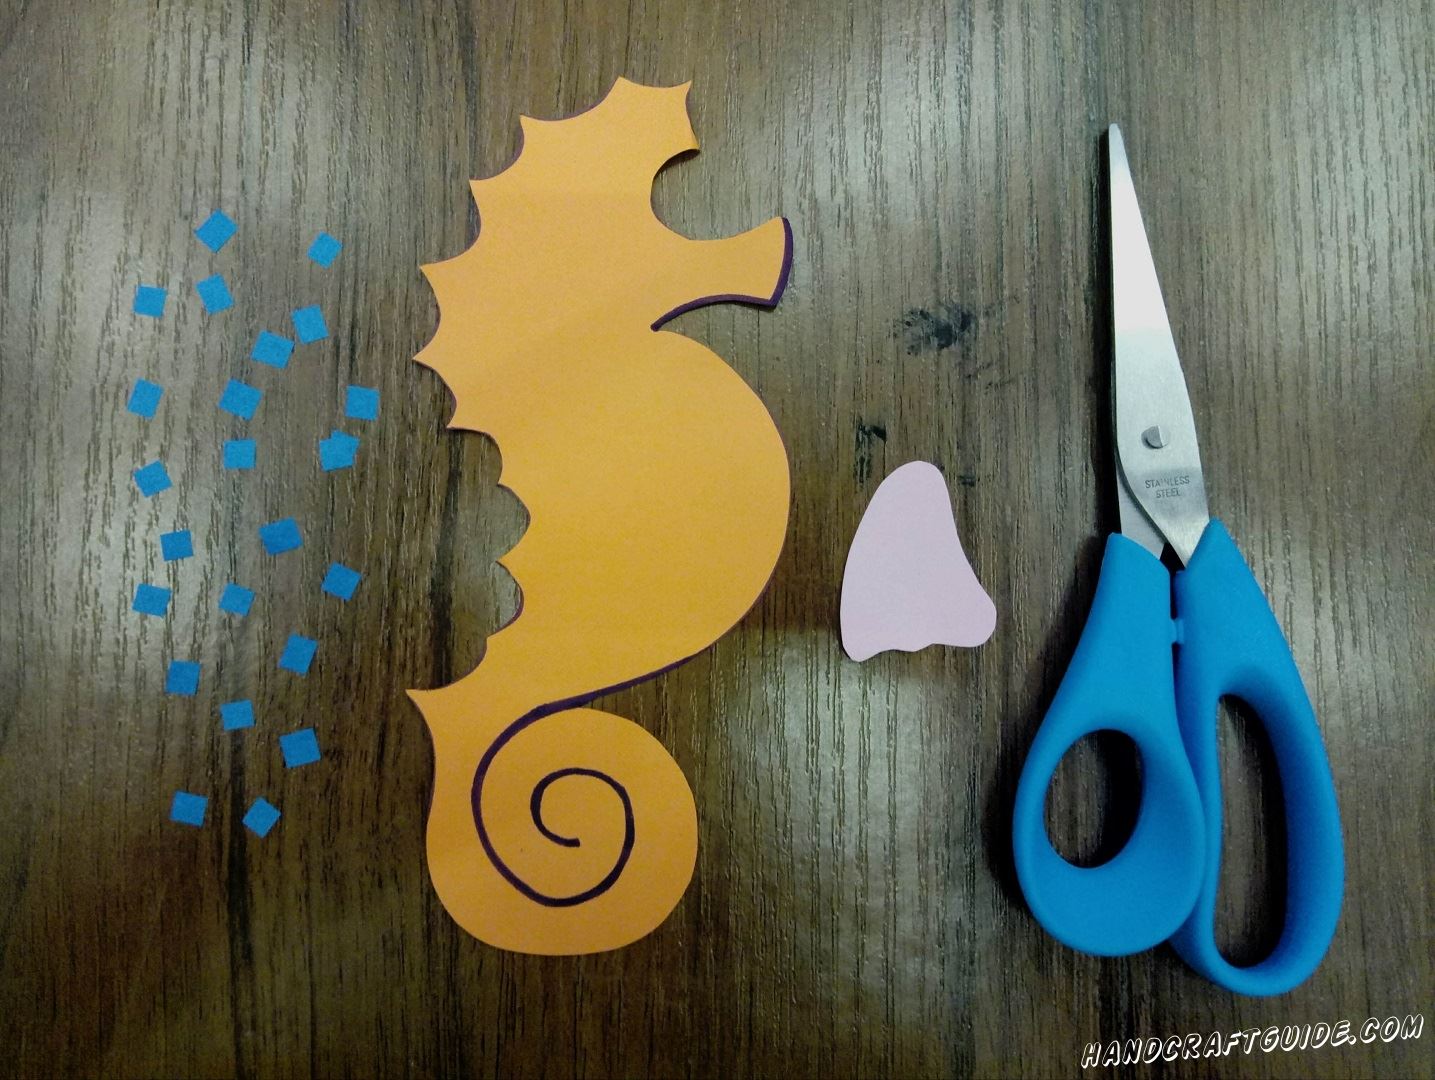 To begin with, we need to draw on the yellow sheet of paper, and then cut out the silhouette of the seahorse as in the photo. Then cut out a lot of small squares with blue paper and a fin of white